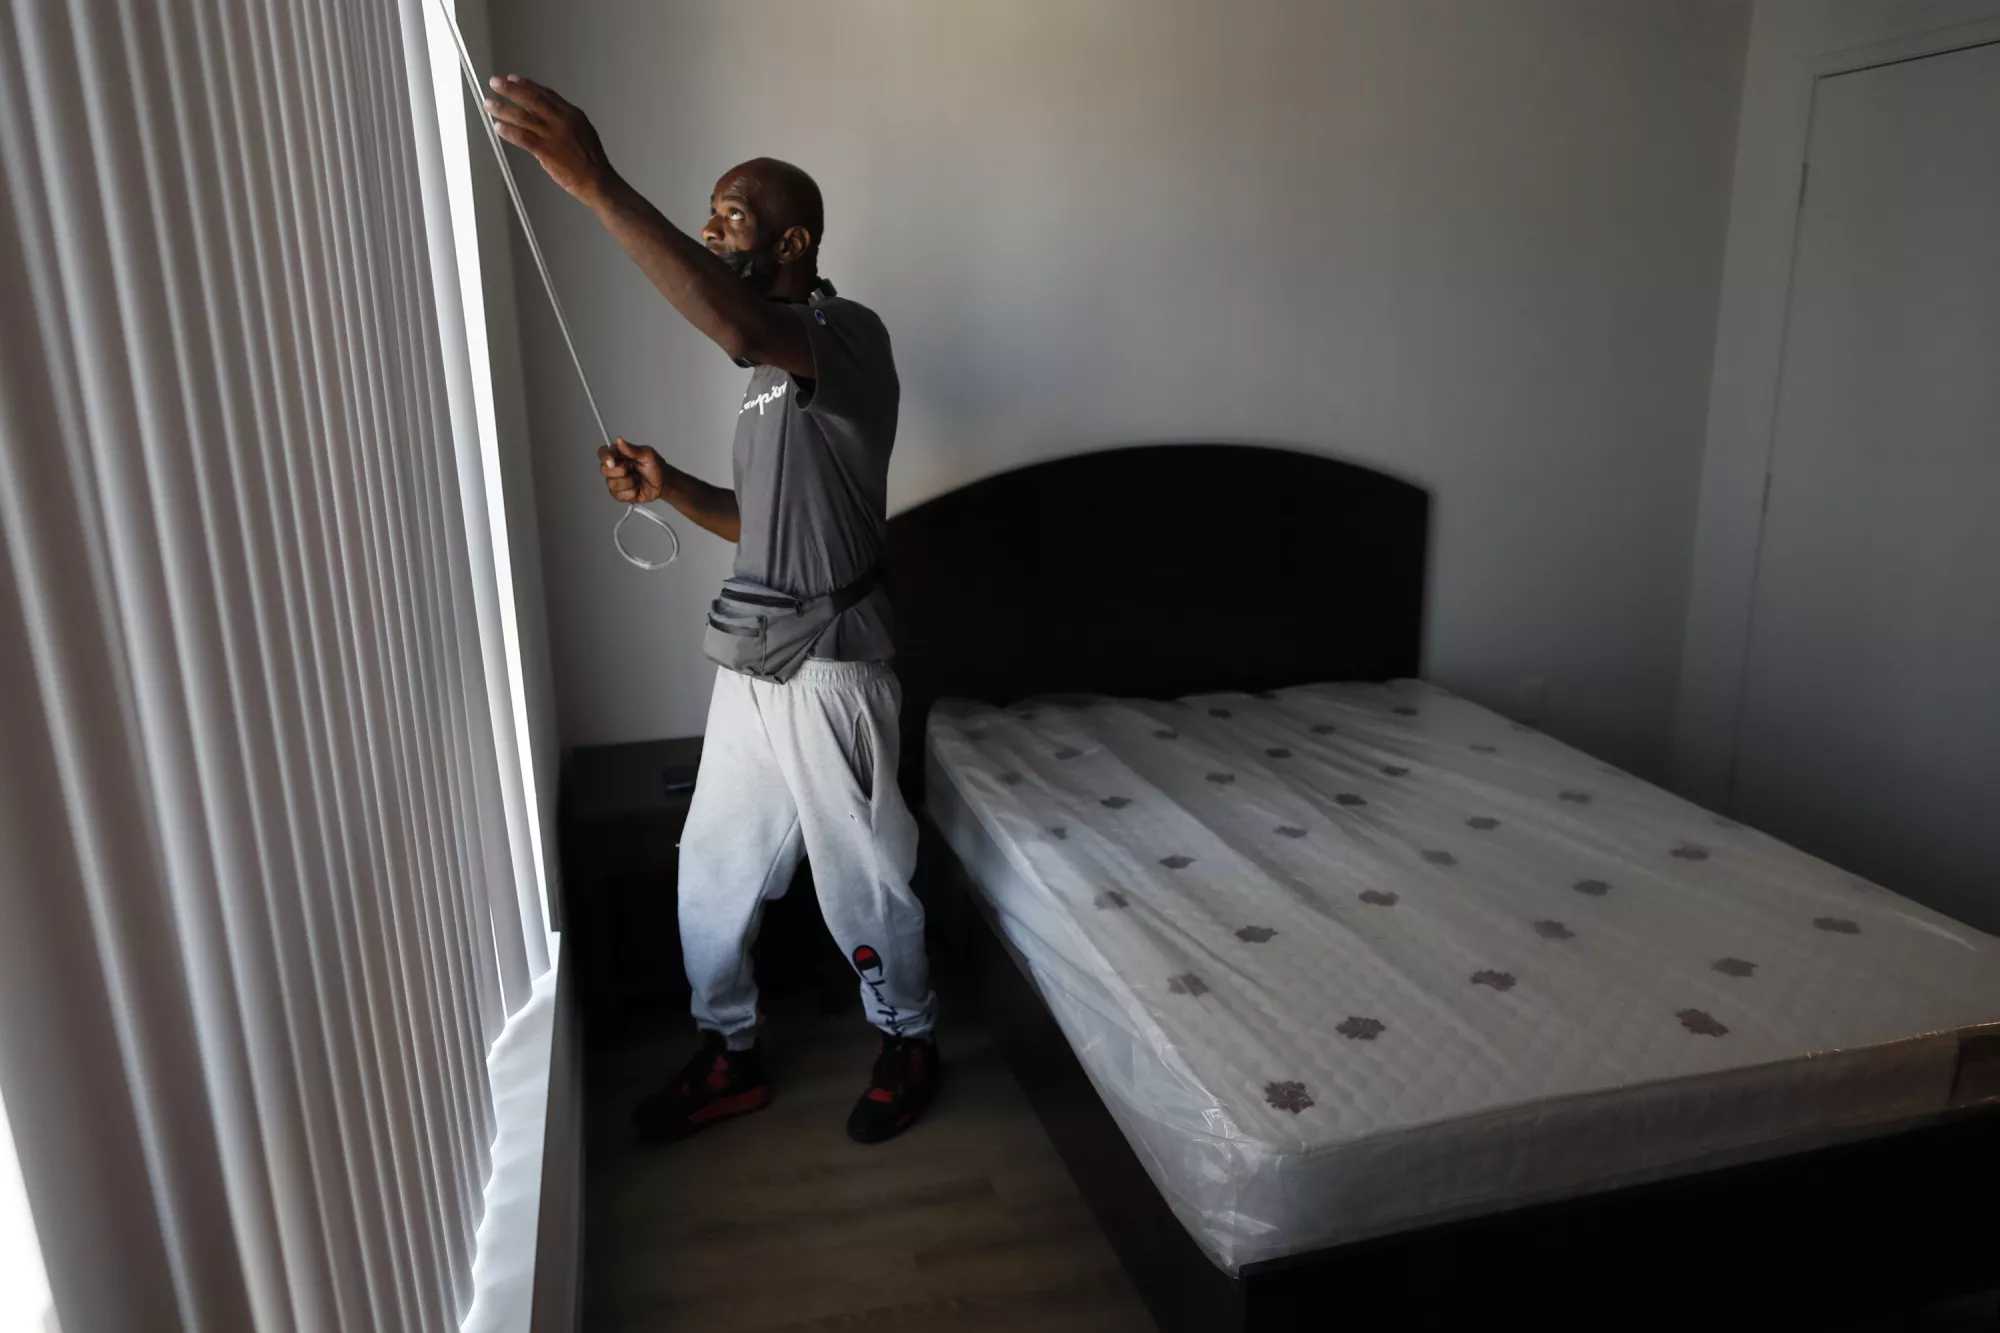 Donald Winston adjusts the blinds moments after moving into his new apartment — the first-ever home of his own. ©Robert Gauthier/Los Angeles Times